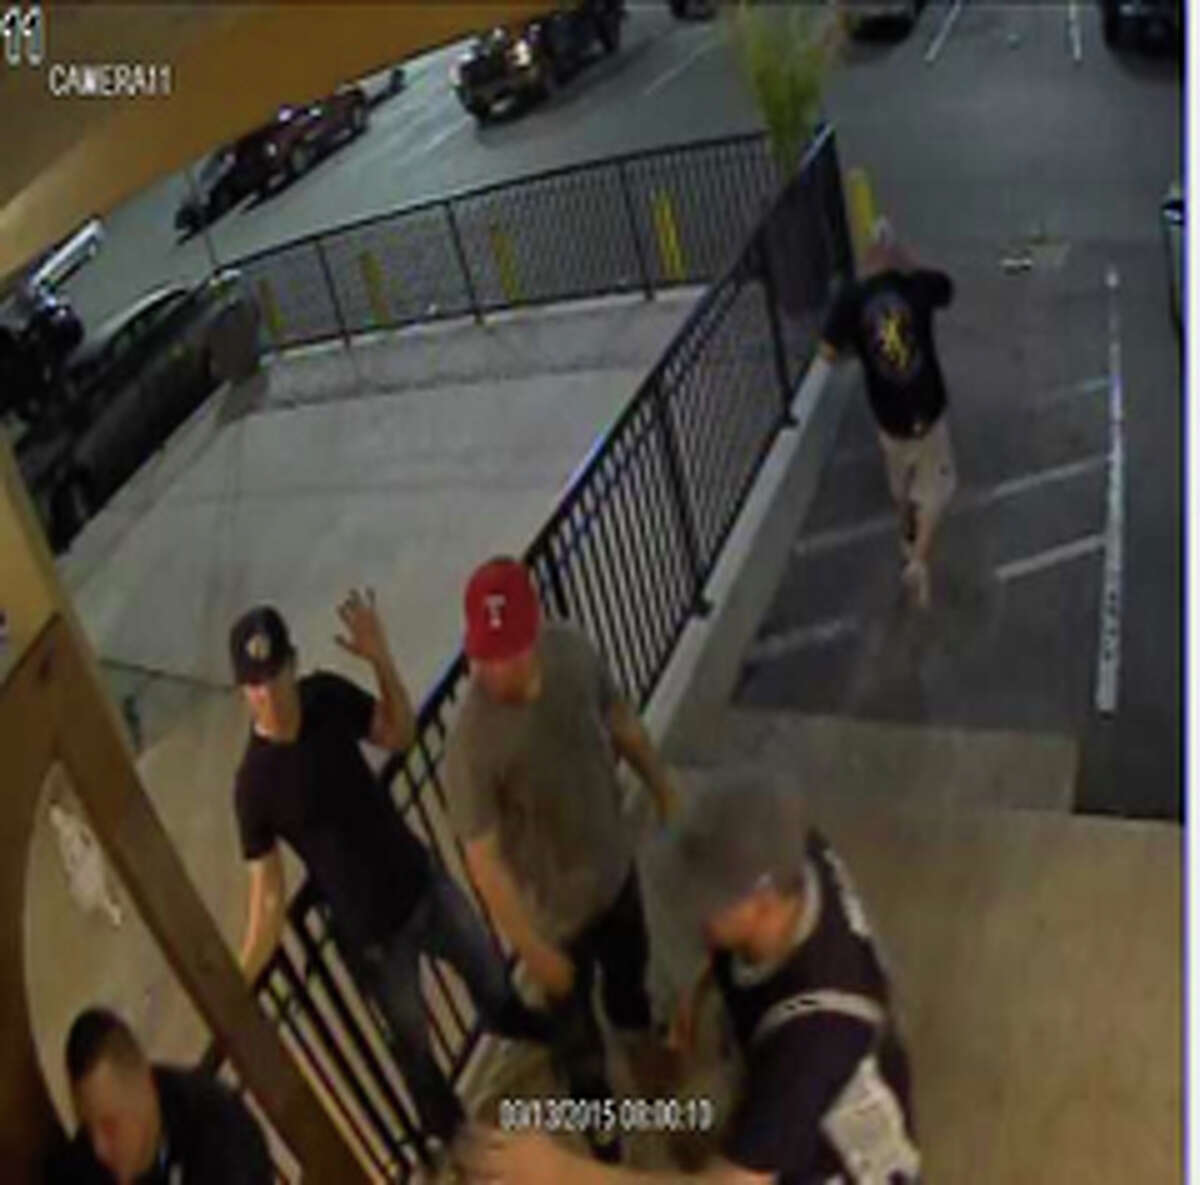 The San Antonio Police Department’s Homicide Unit requests the public’s assistance in identifying the above pictured suspect wearing a black t-shirt and black cap. On March 13, 2015 at approximately 2am, the suspect was involved in a fight outside of a bar located at 1946 SW Military Drive. The victim was knocked unconscious during the course of the fight and was left on the ground in the parking lot. The pictured suspect got into a black truck, allegedly backed up hitting another car, and then fled in a hurry running over the victim. Anyone with any information on the identity of the suspect is encouraged to call Crime Stoppers at 224-STOP. Crime Stoppers will pay up to $5000 for any information that leads to an arrest in this crime.